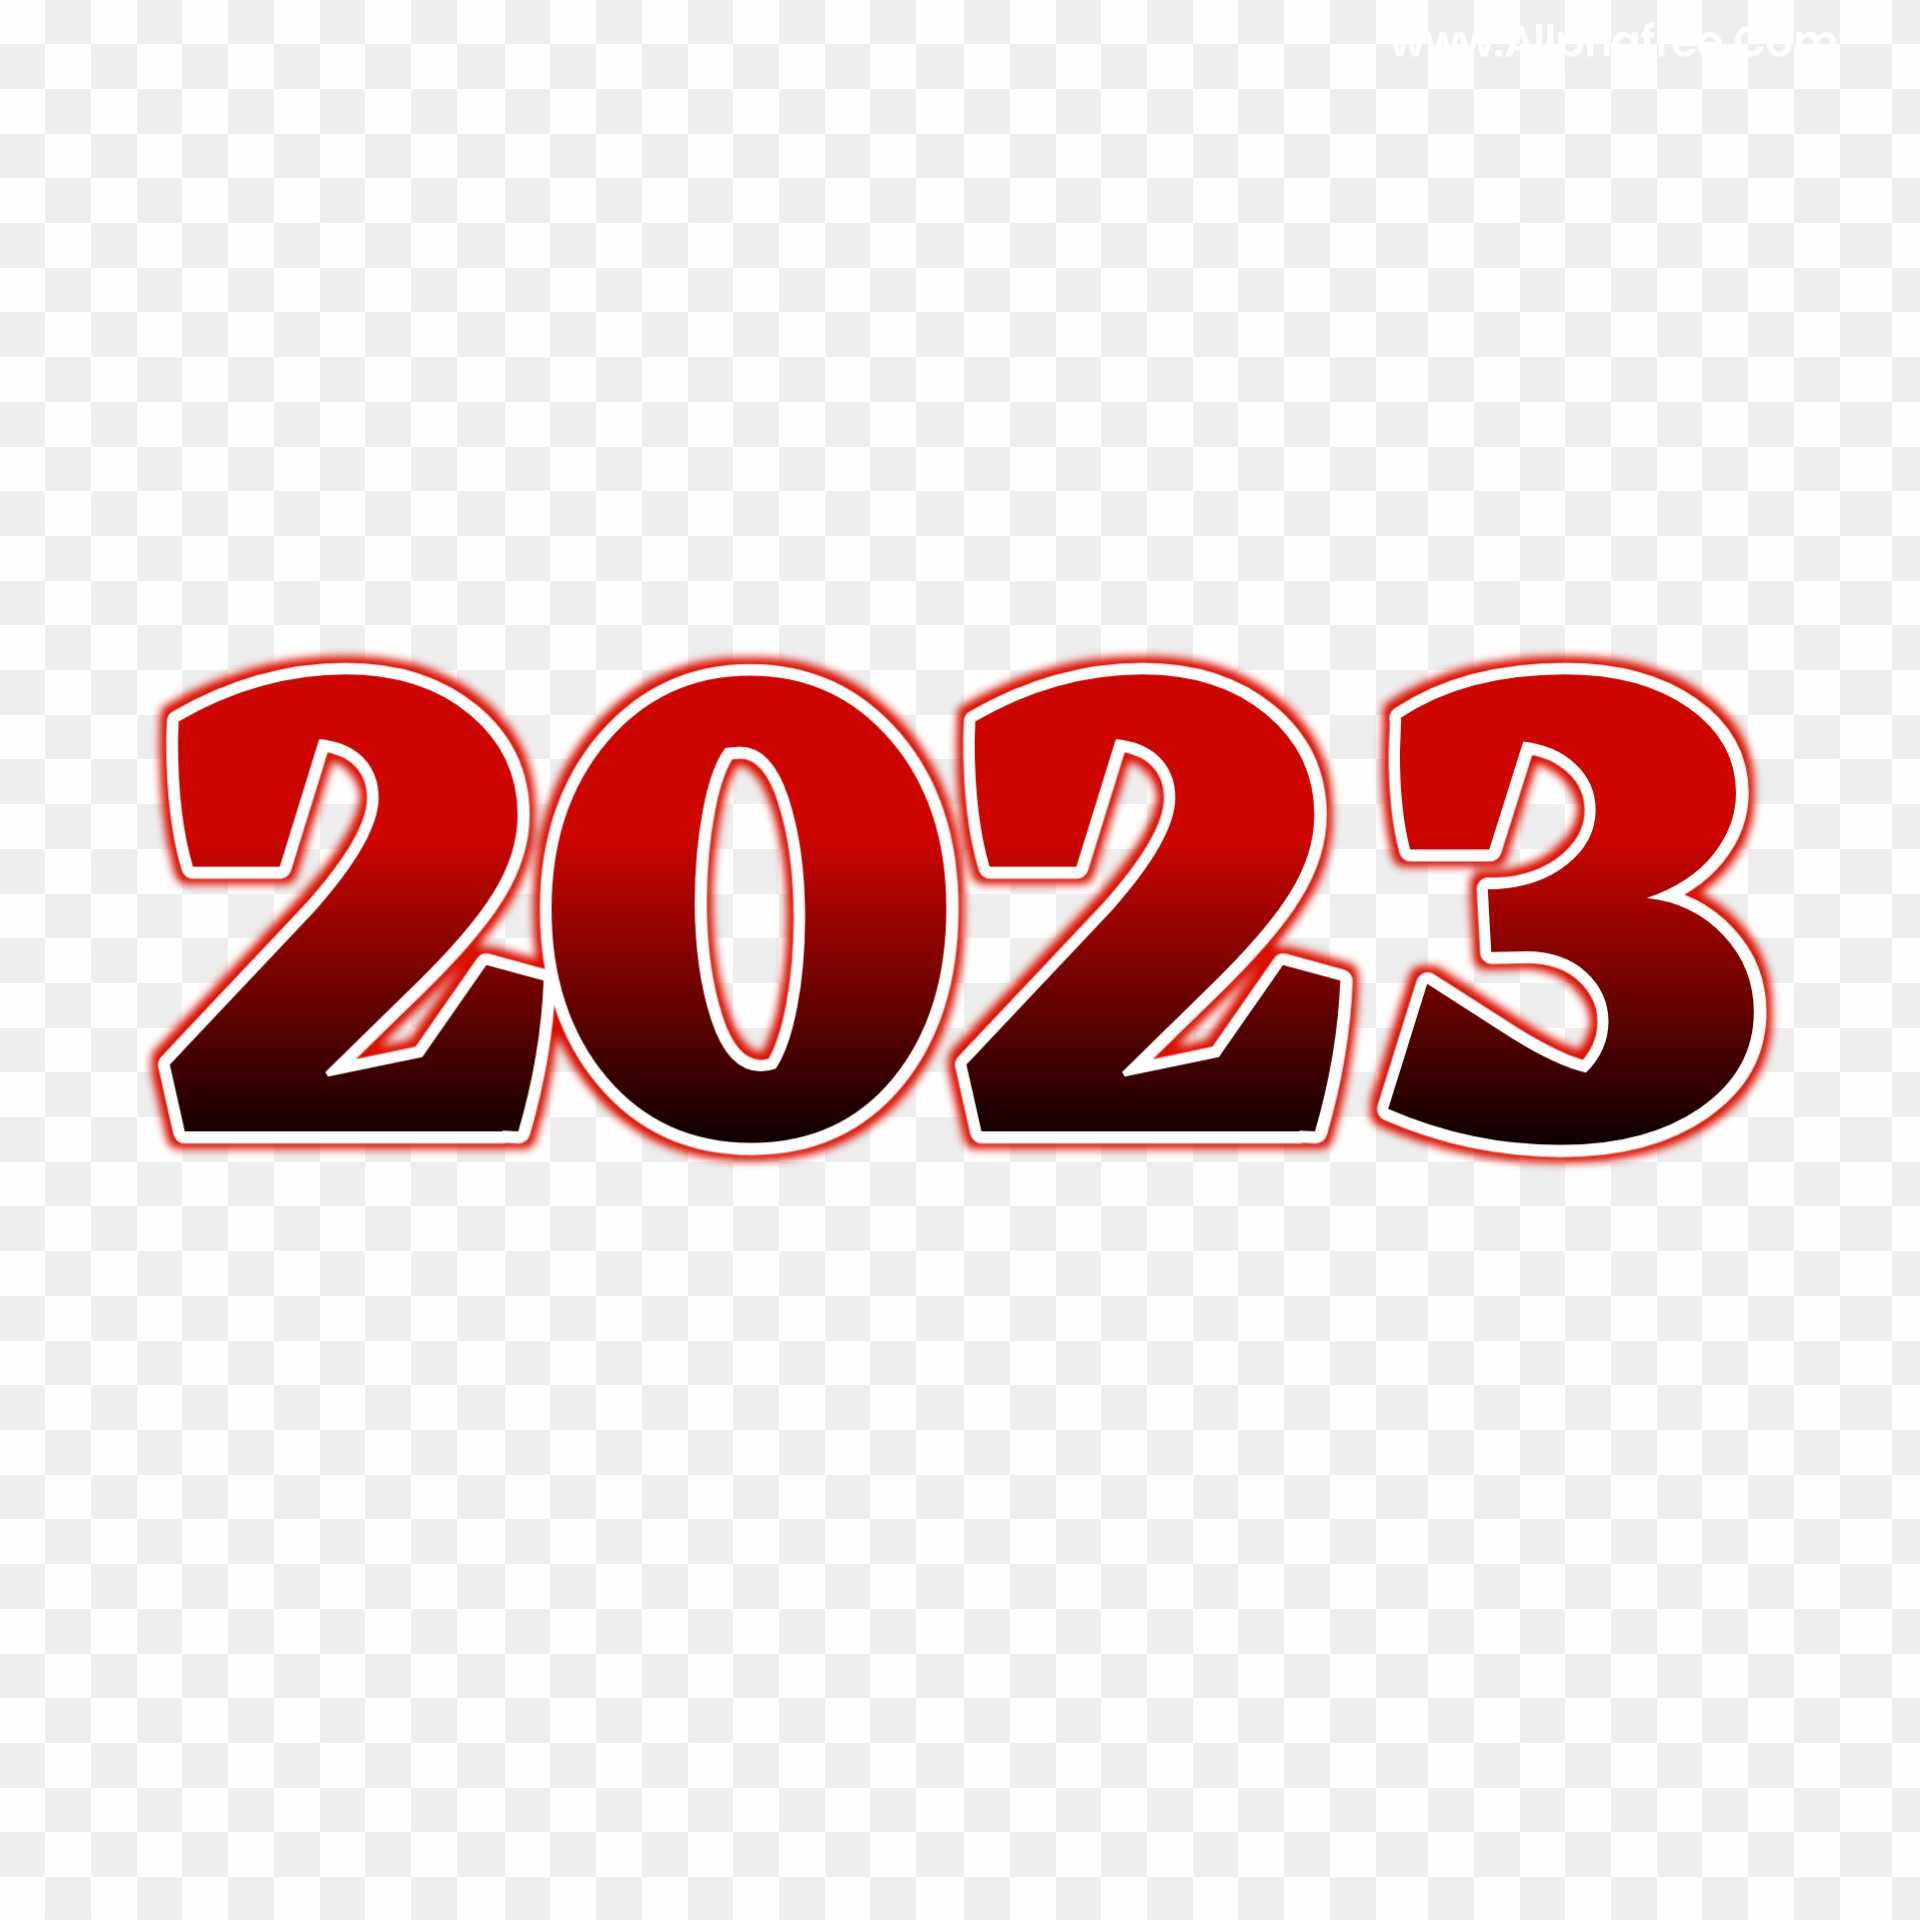 2023 text number PNG images download